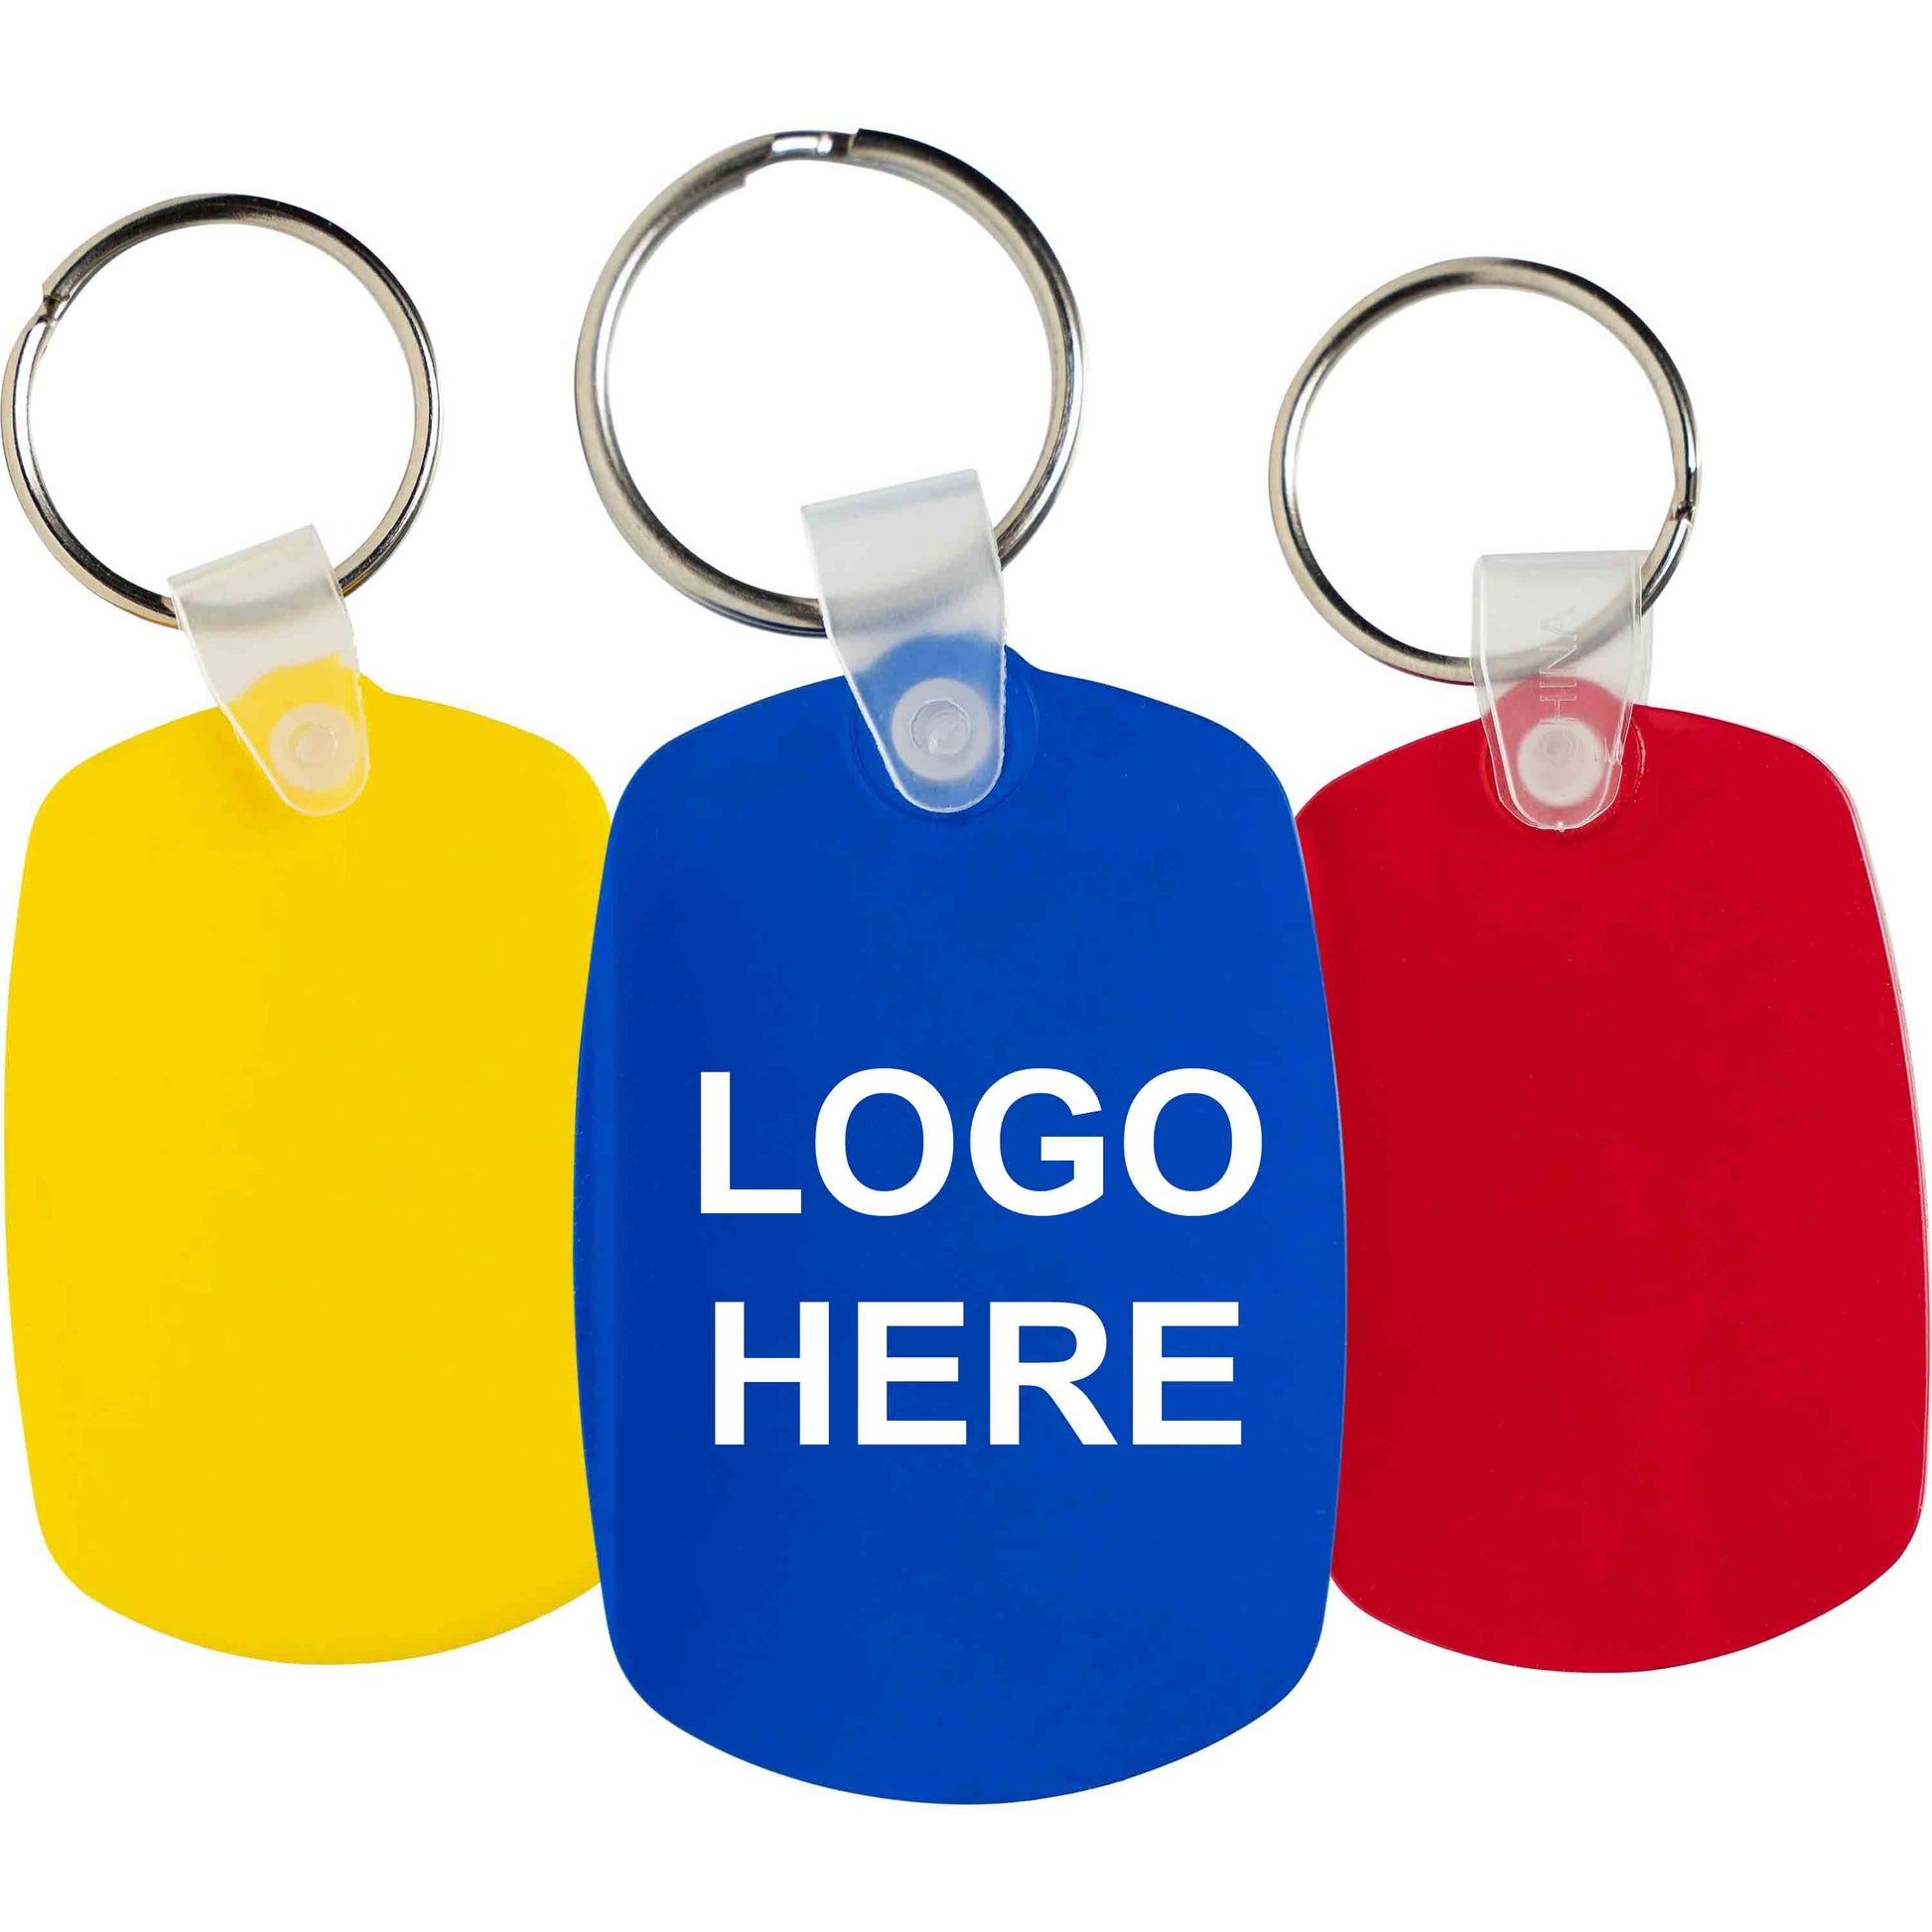 ACRYLIC KEYCHAIN BLANKS 2, 48 Set Clear Disc Key Chain with Open